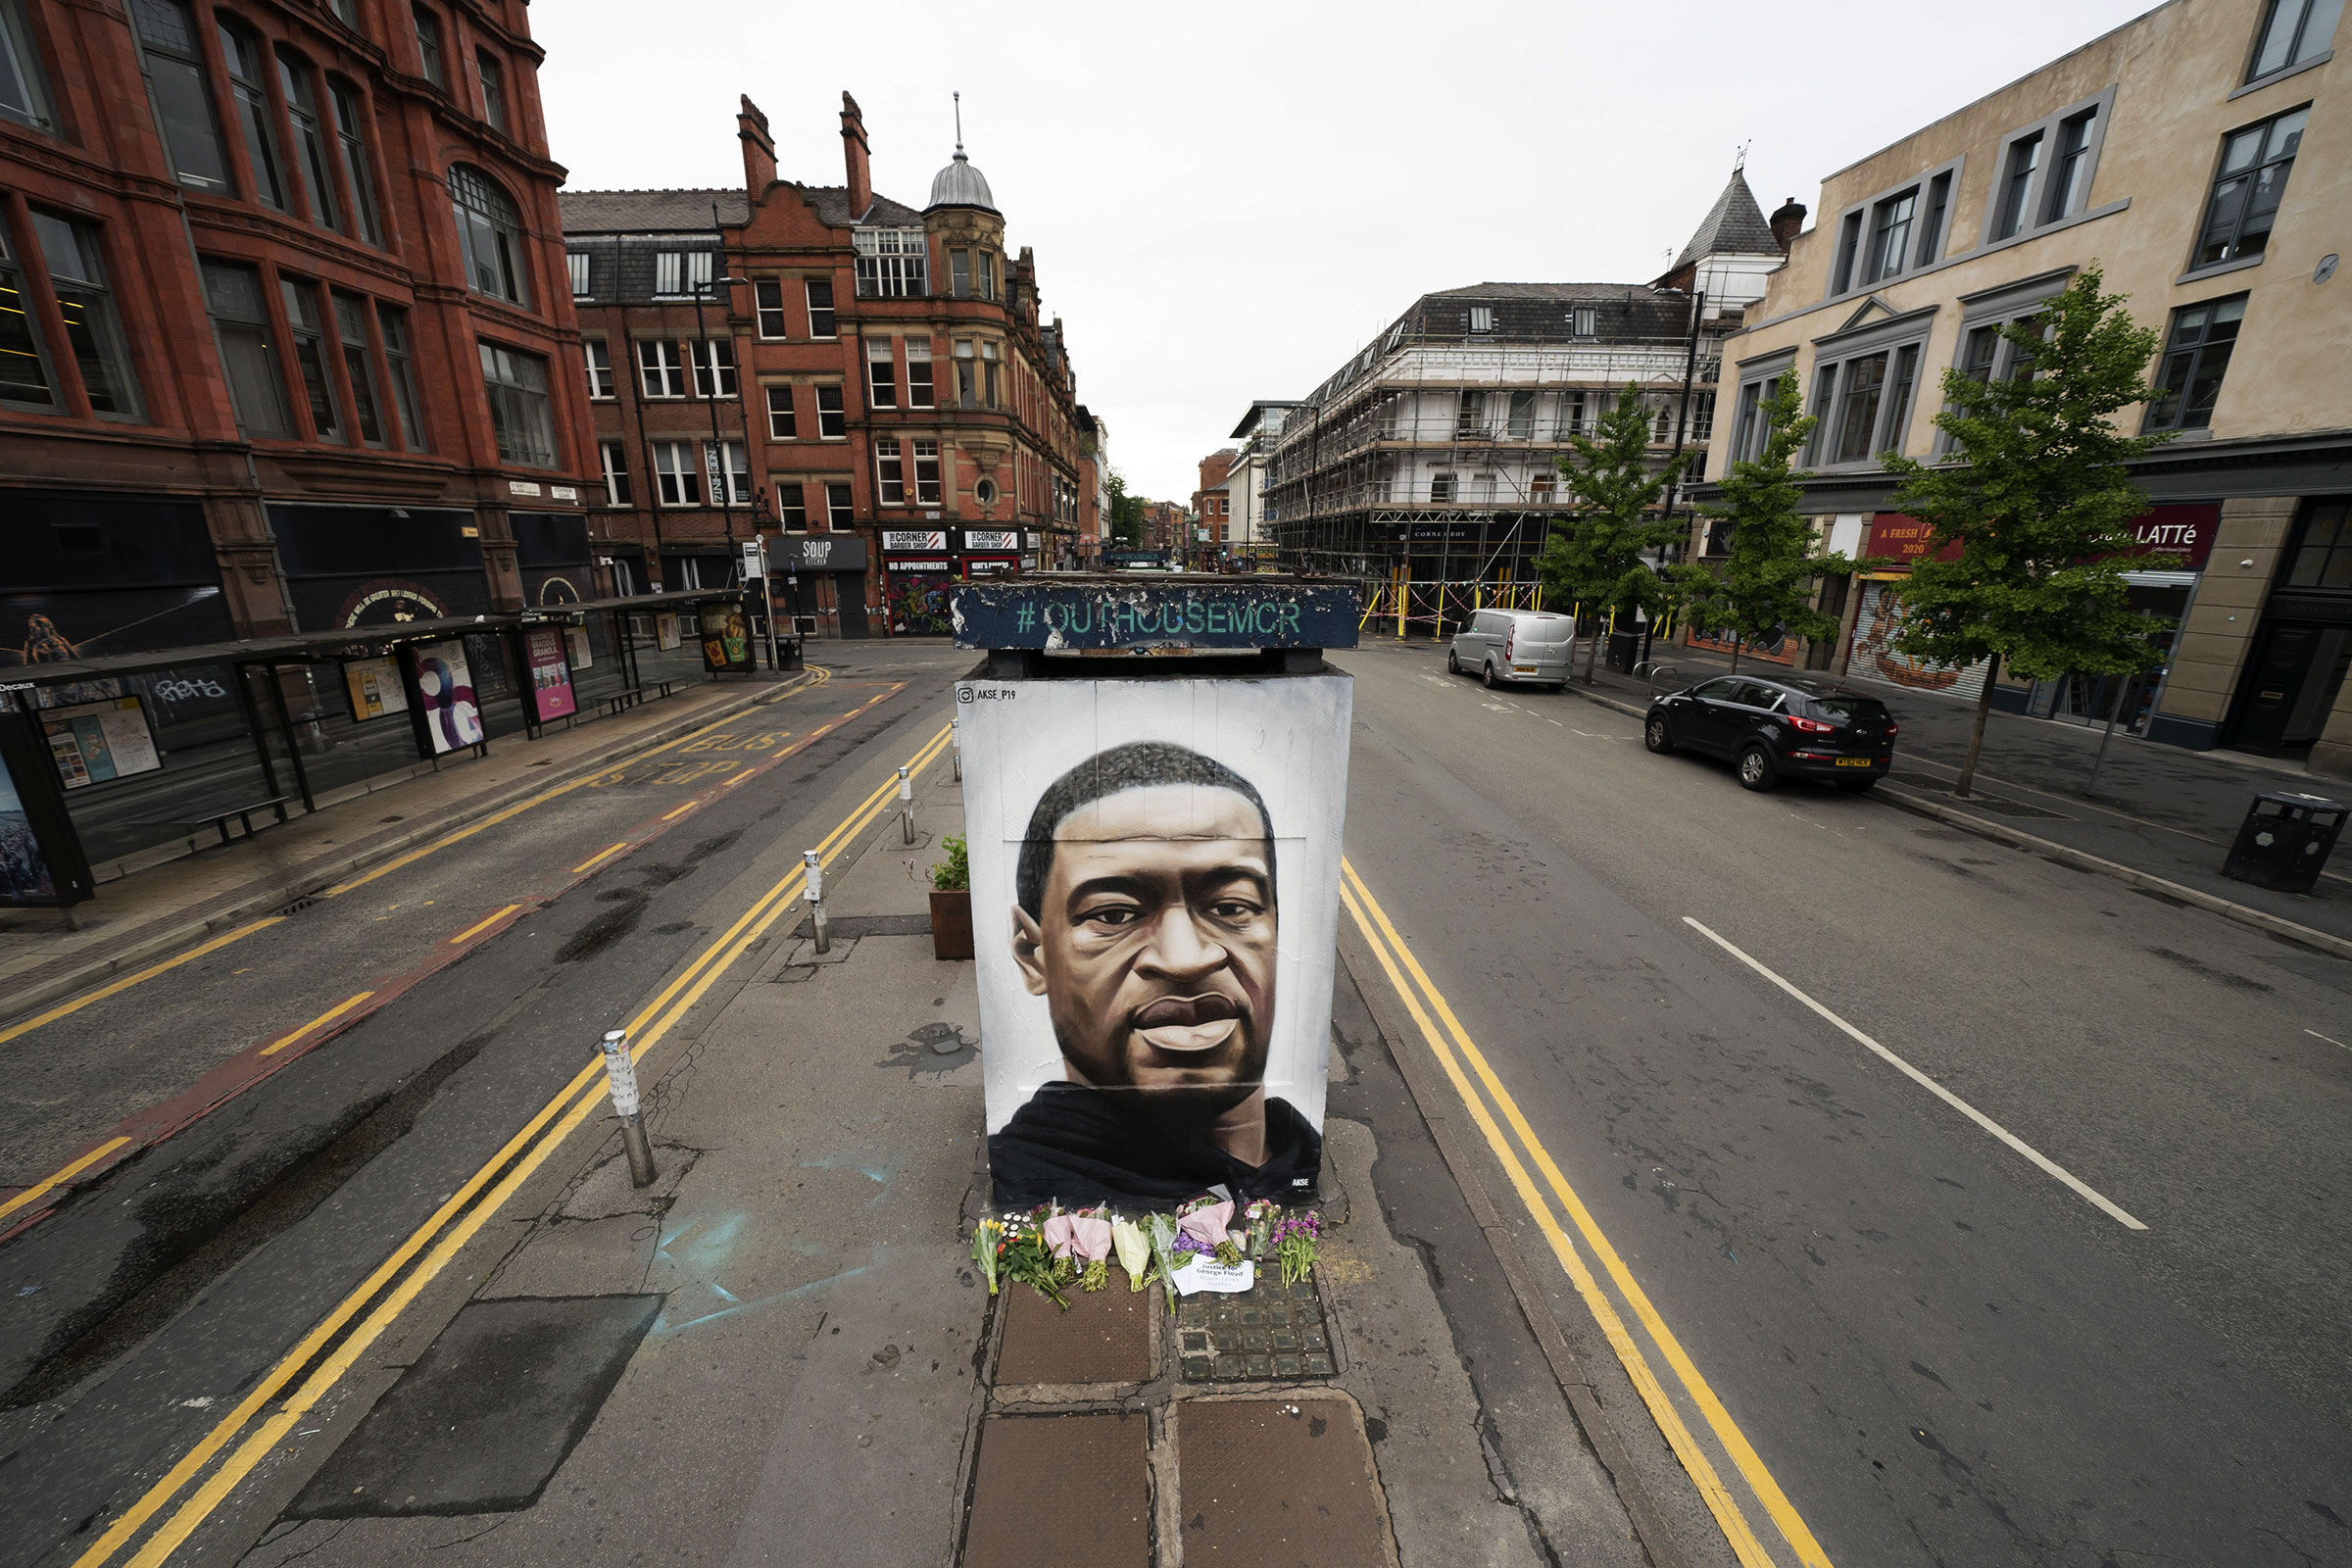 A mural of George Floyd in central Manchester, Britain on June 4, 2020. (Chine Nouvelle—SIPA/Shutterstock)